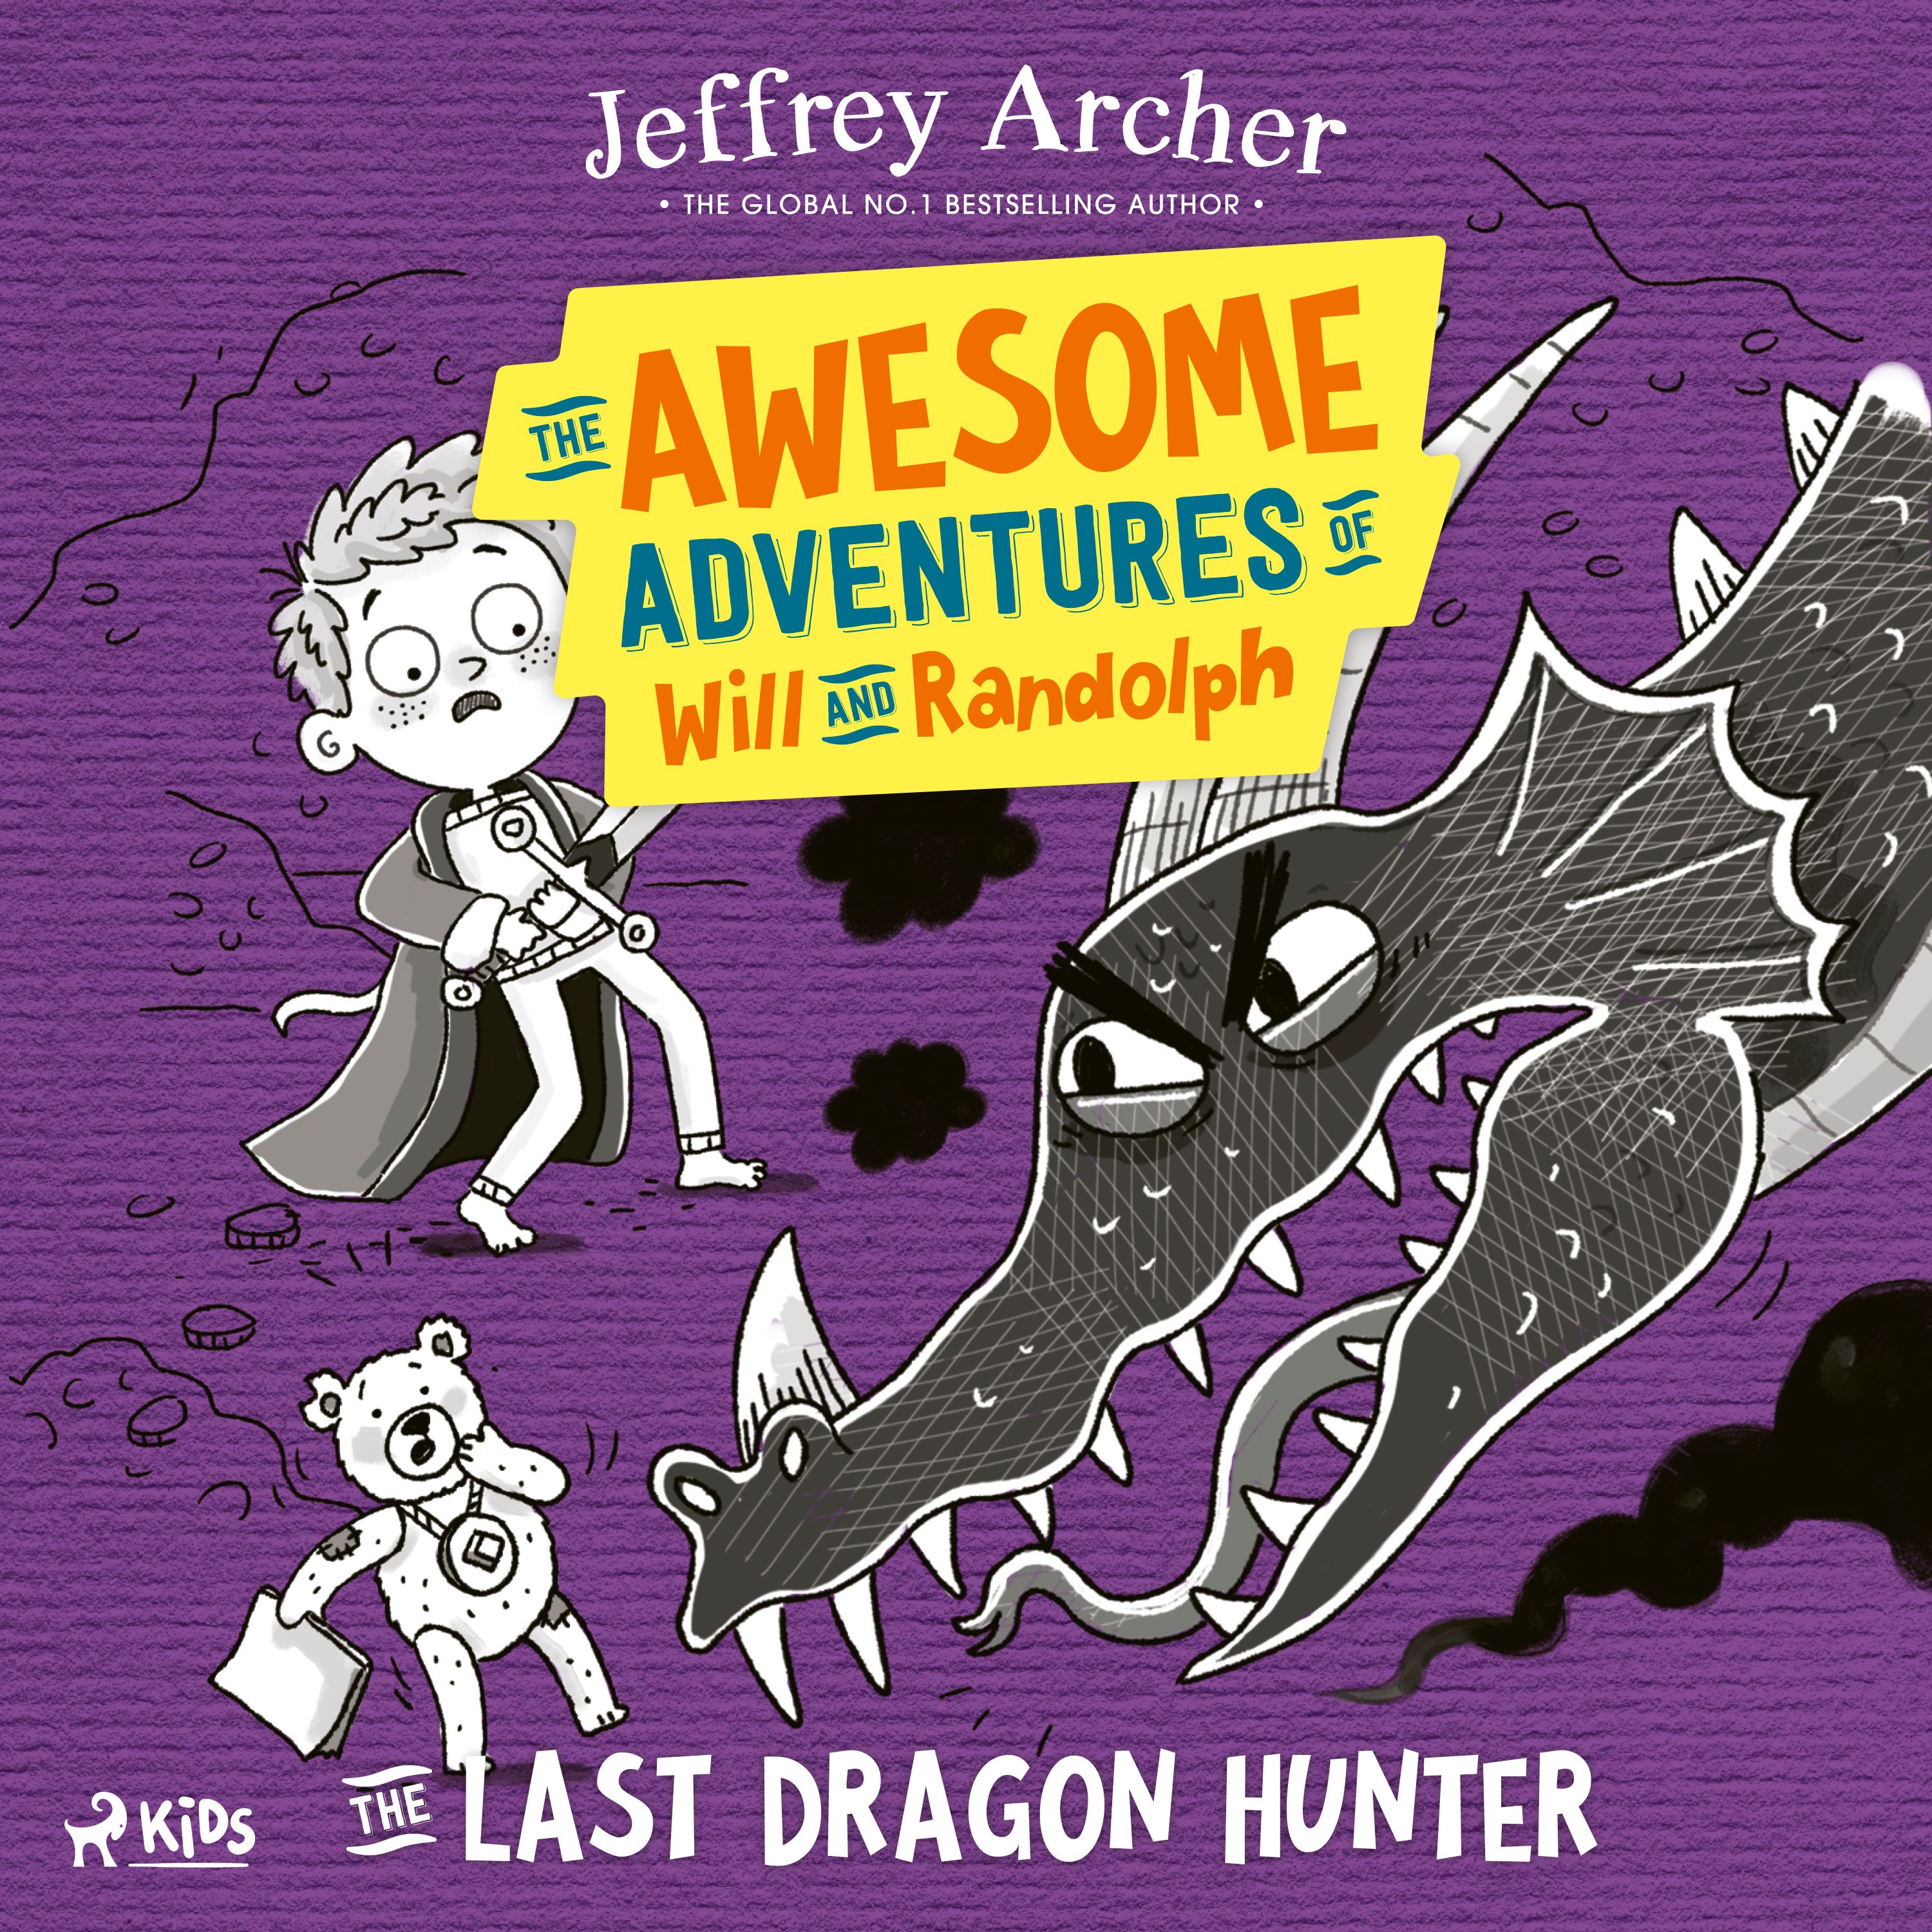 The Awesome Adventures of Will and Randolph: The Last Dragon Hunter, audiobook by Jeffrey Archer